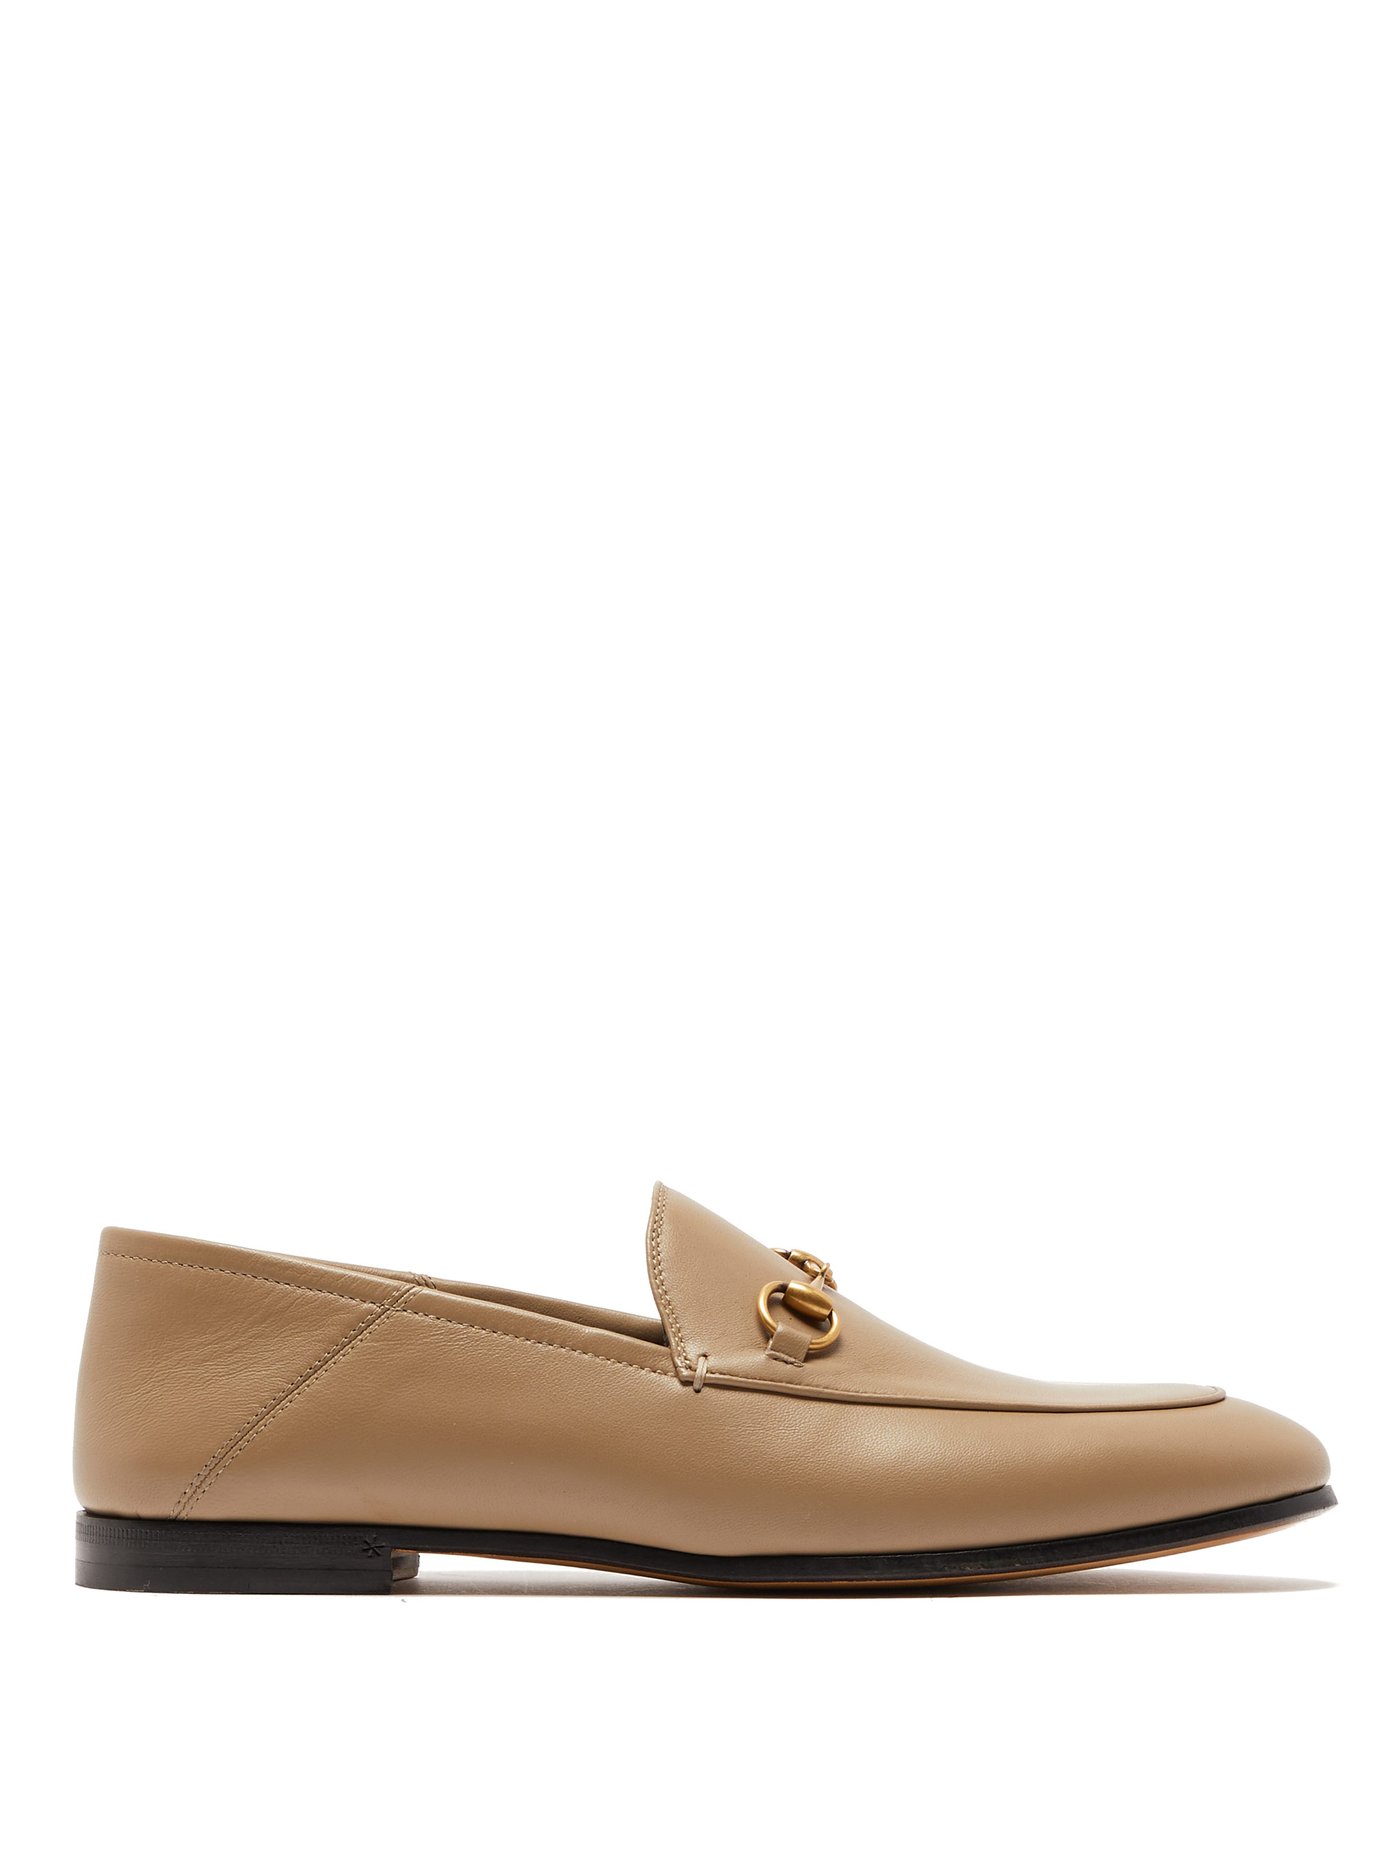 gucci leather horsebit loafer